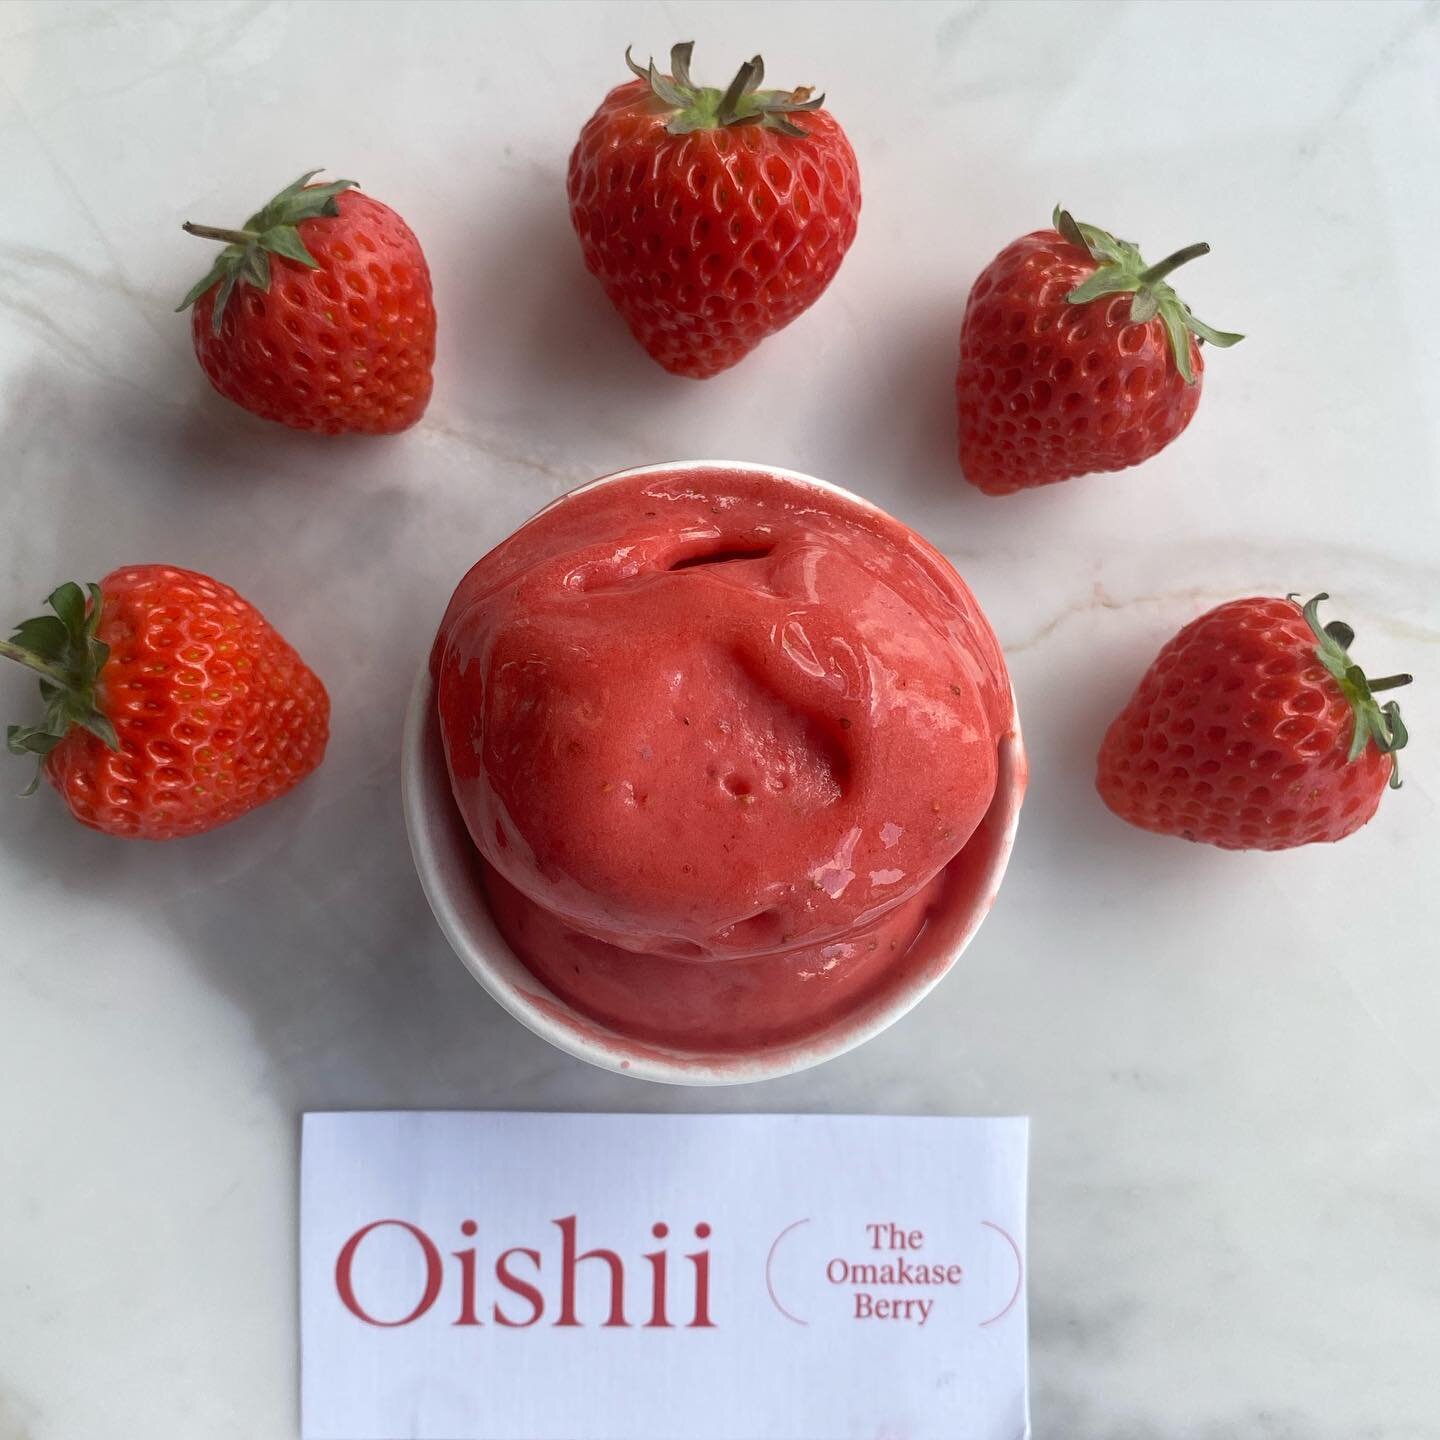 Using The Omakase Berry, we made a sorbet that combined the best farming practices with an obsession for quality to ensure only the most delicious berries make it to your doorstep. @oishii.berry @wholefoods @santachiaracaffe #oishii #omakase #wholefo